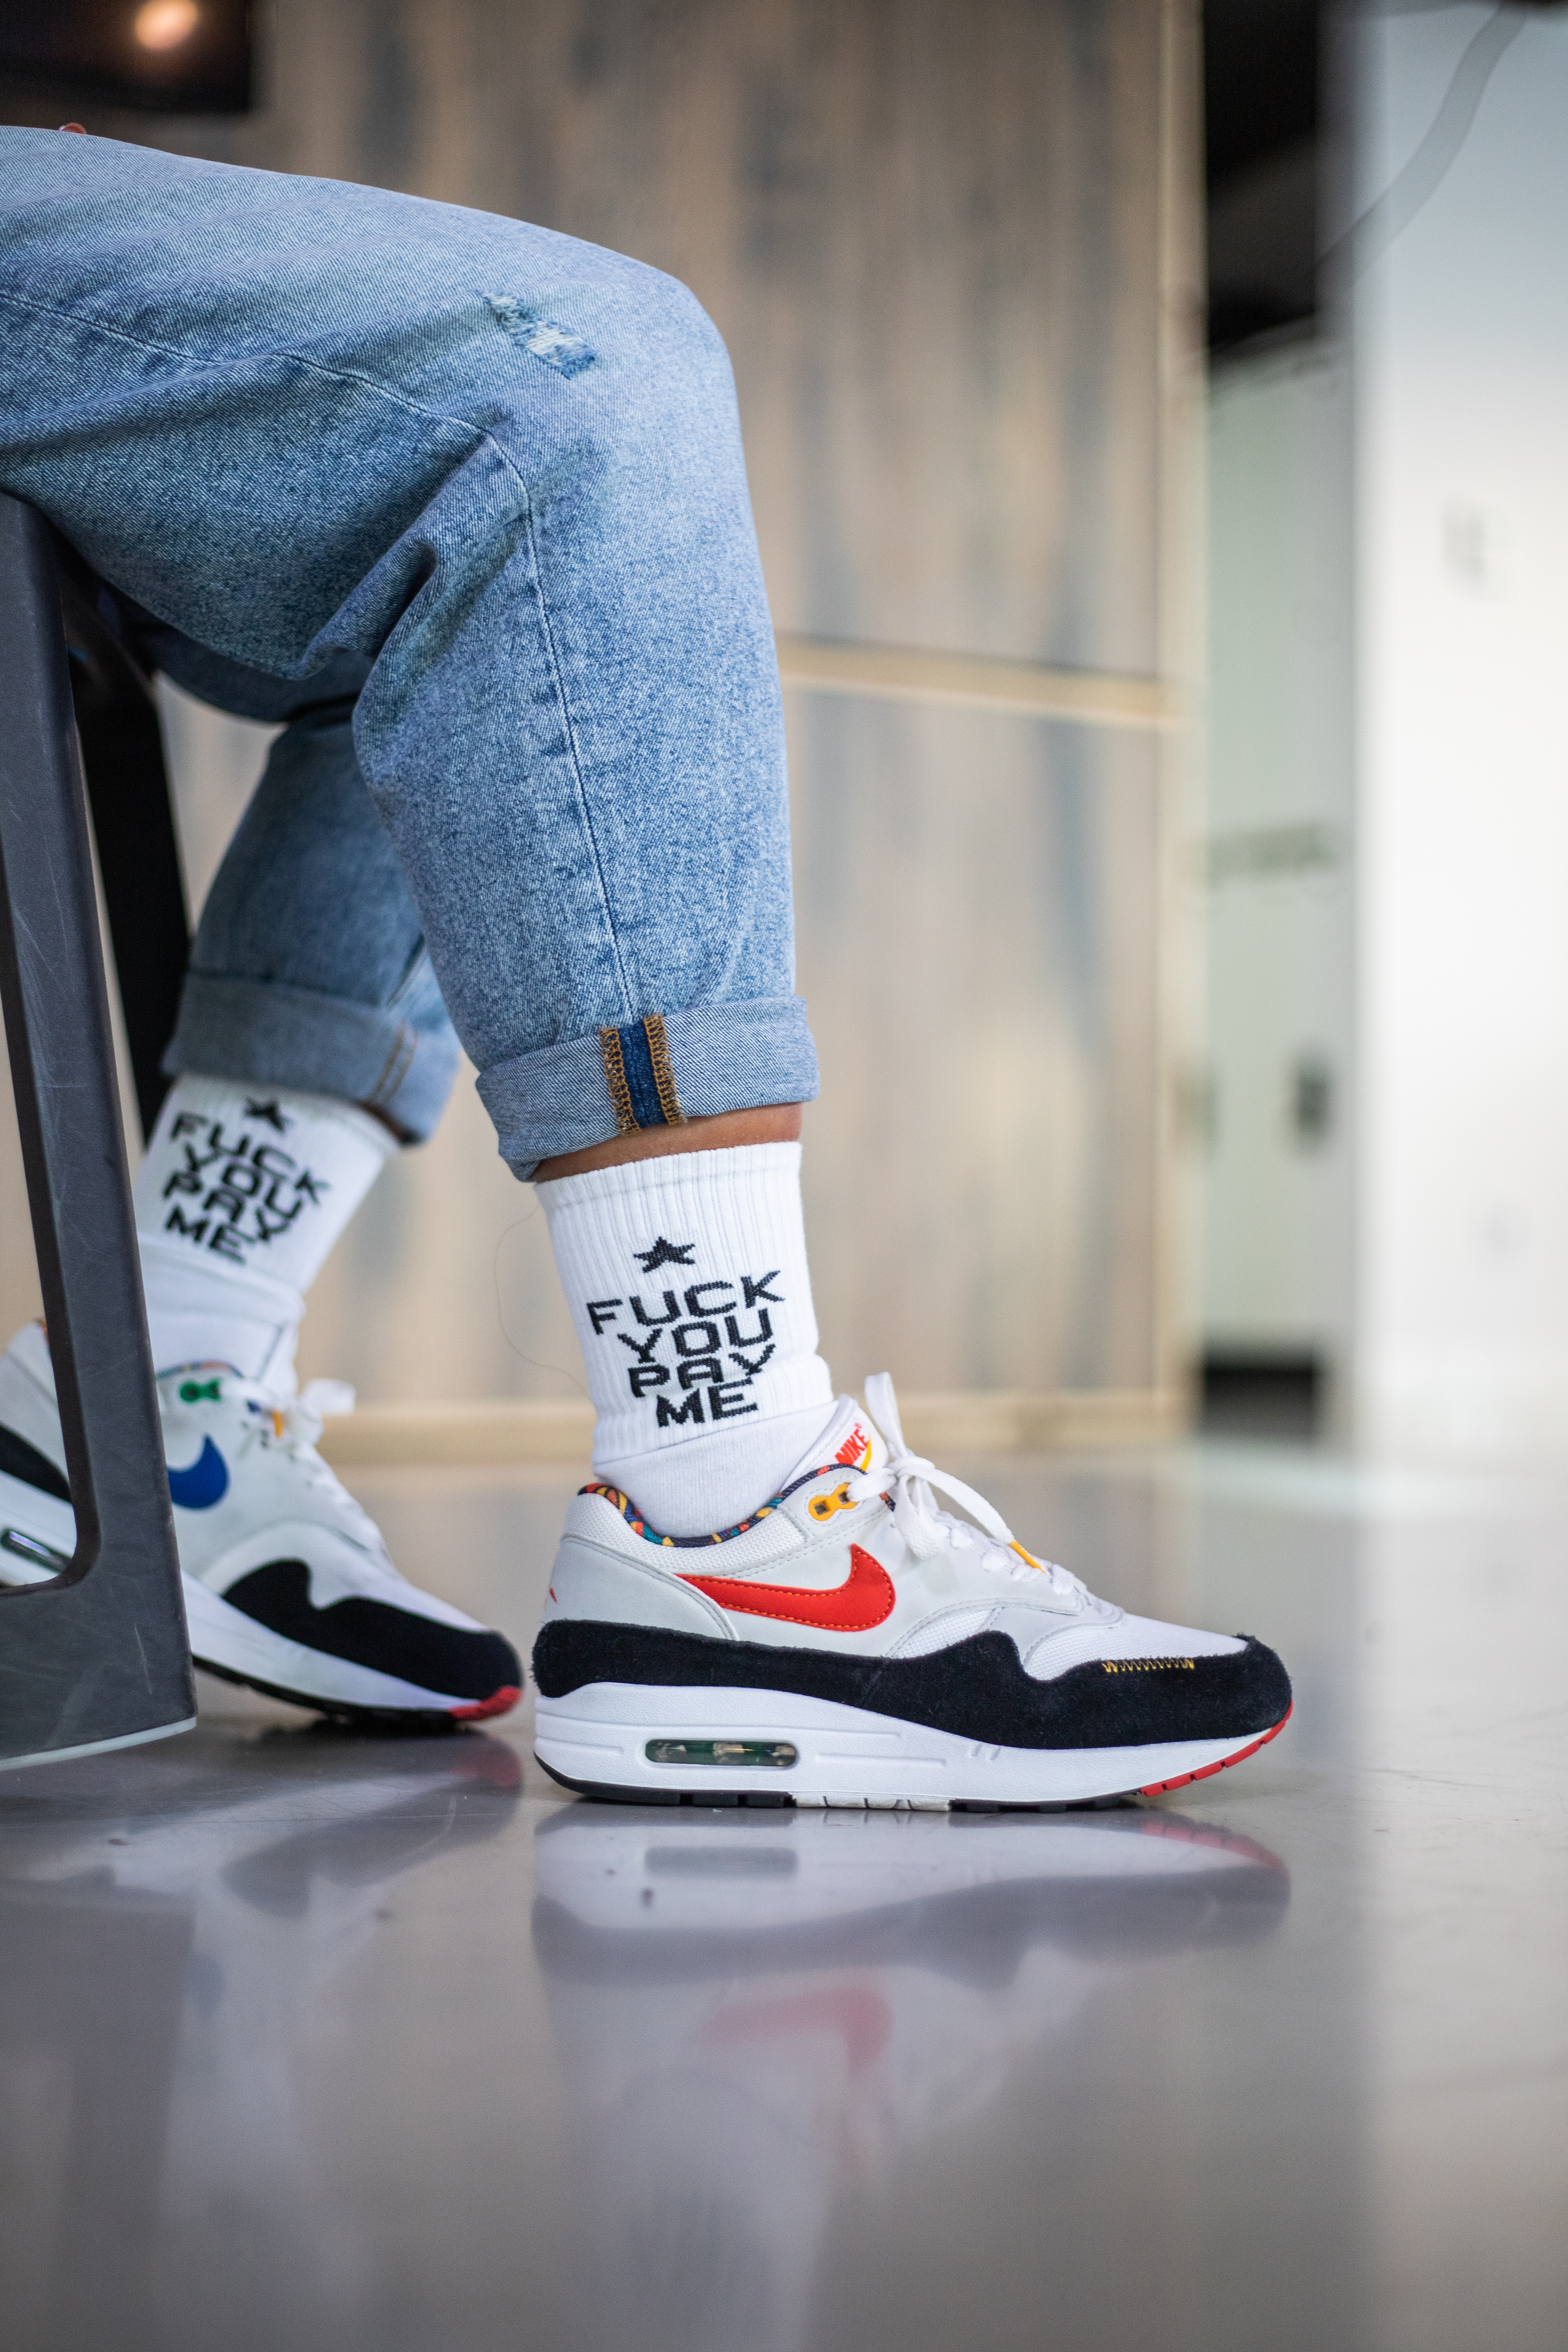 Queens & Sneakers Show Air Max 1